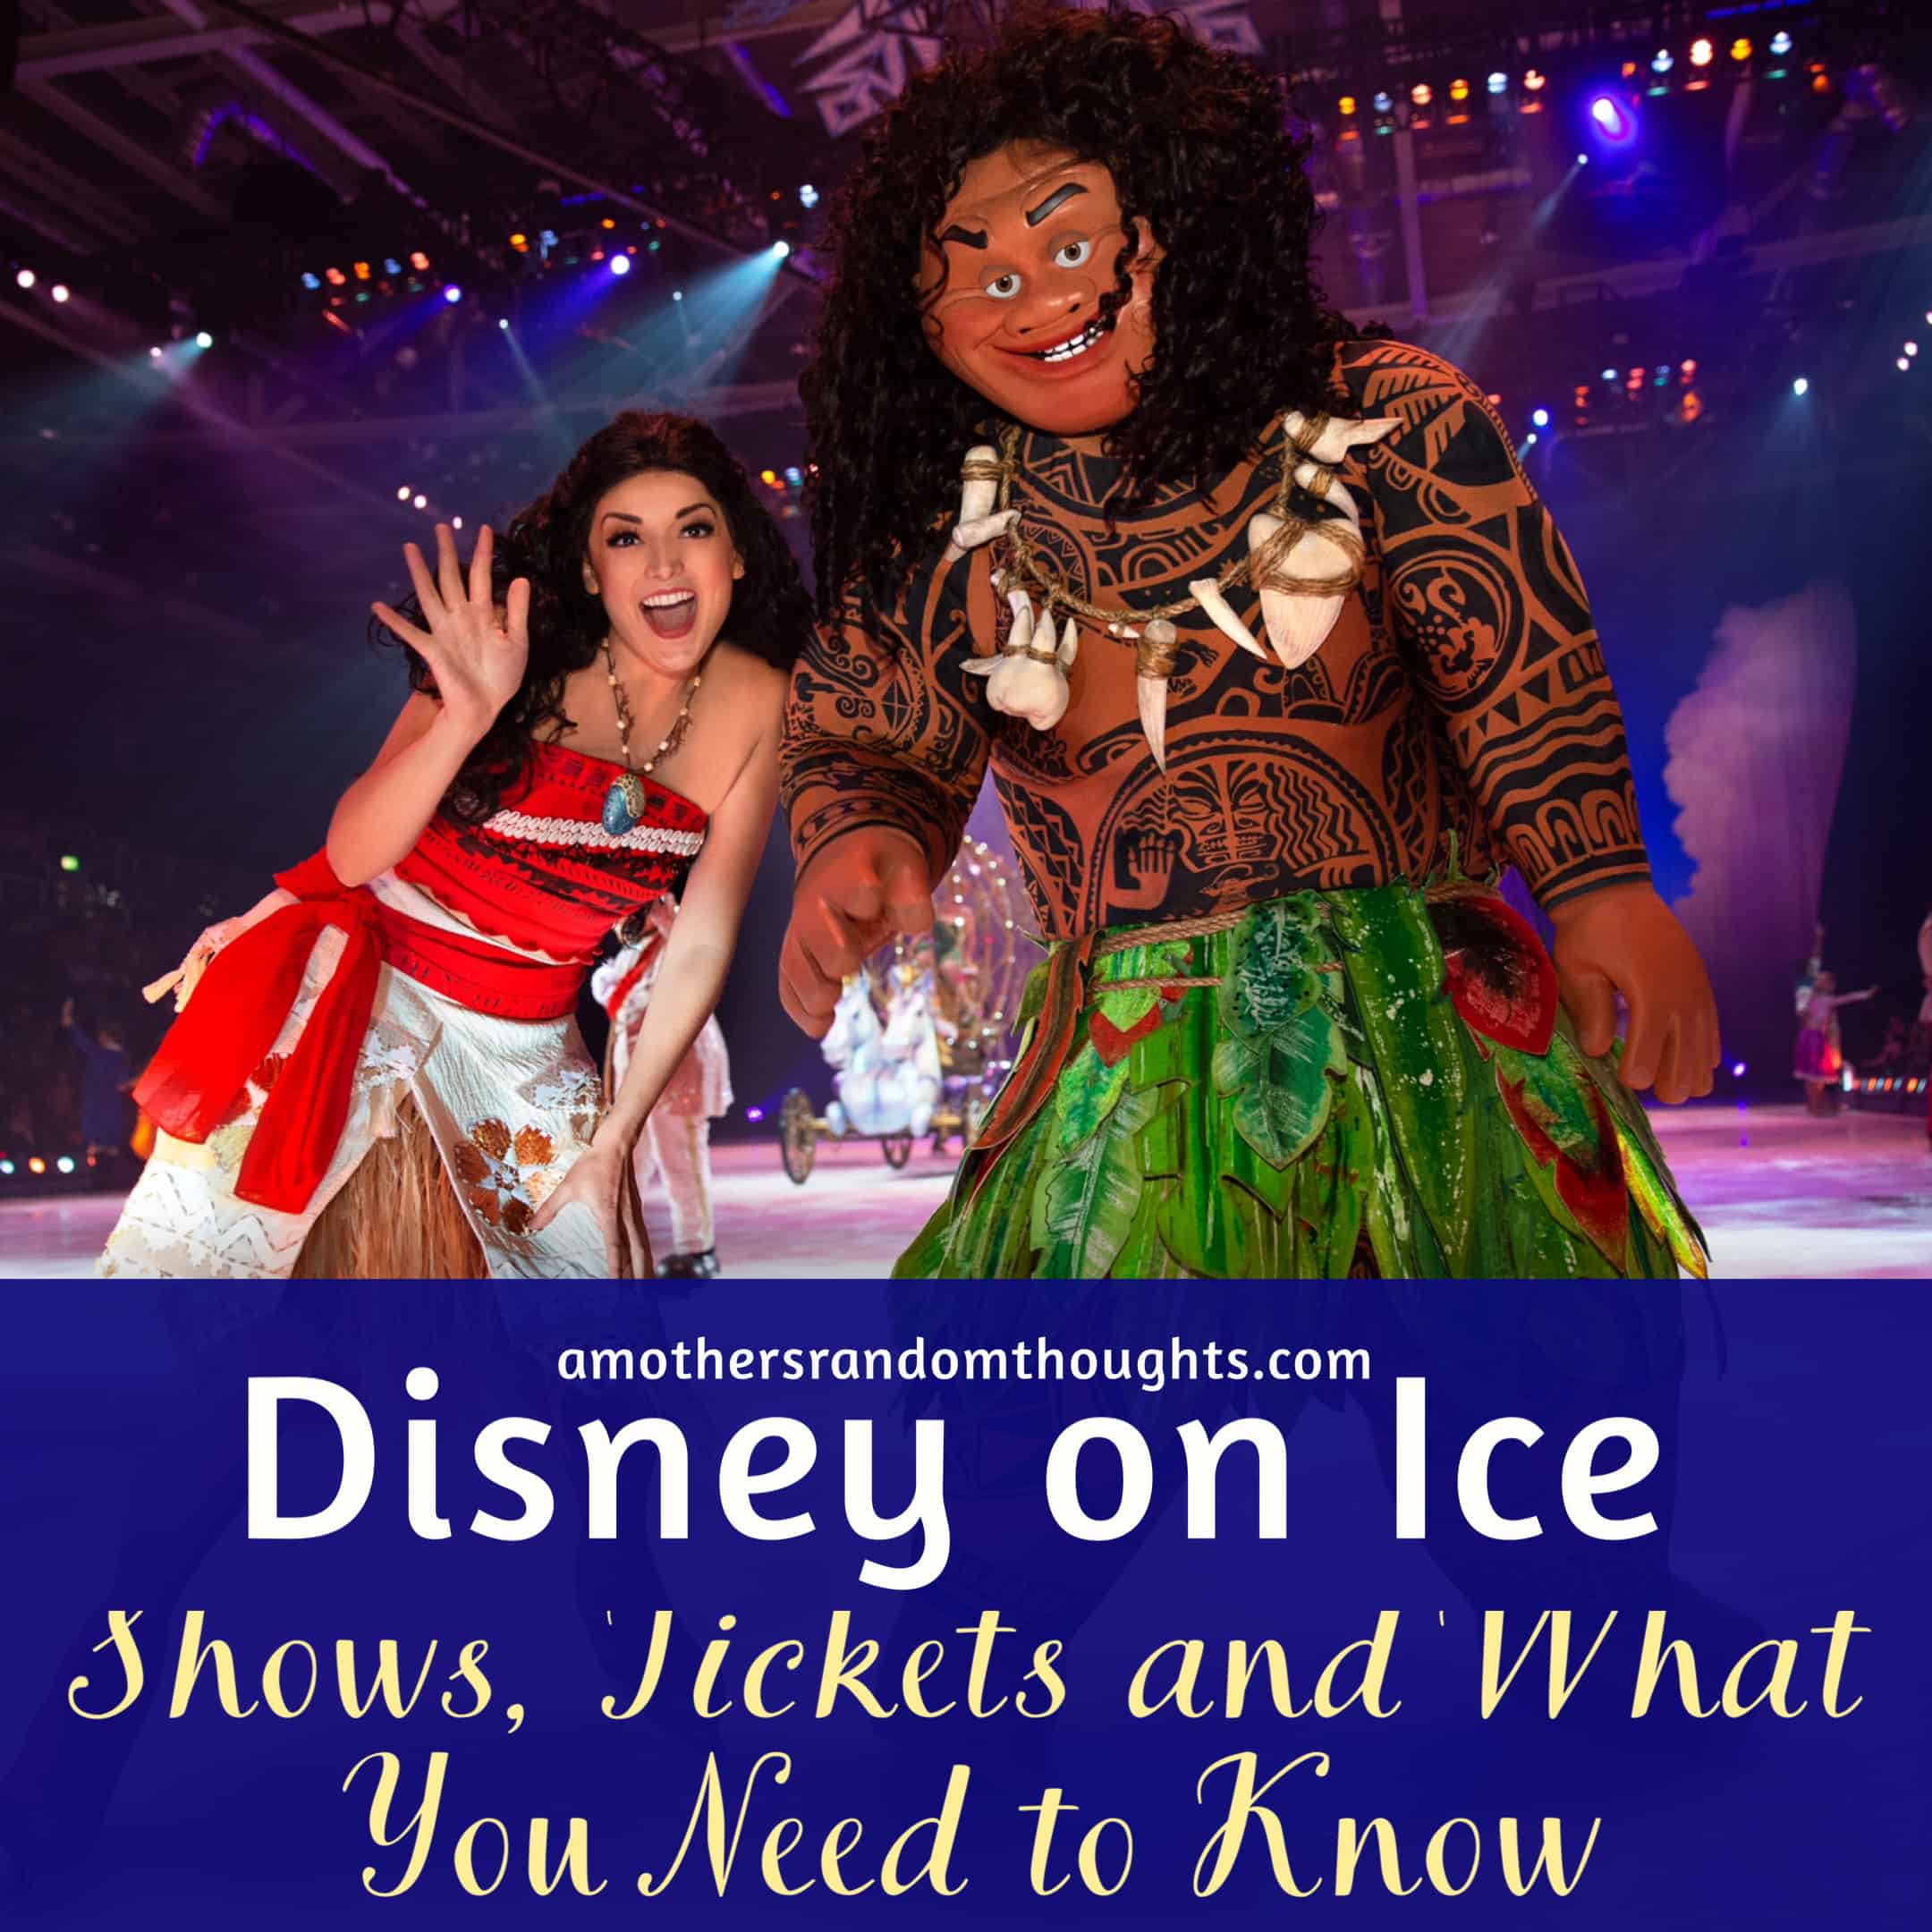 Disney on Ice shows, tickets and wht you need to know